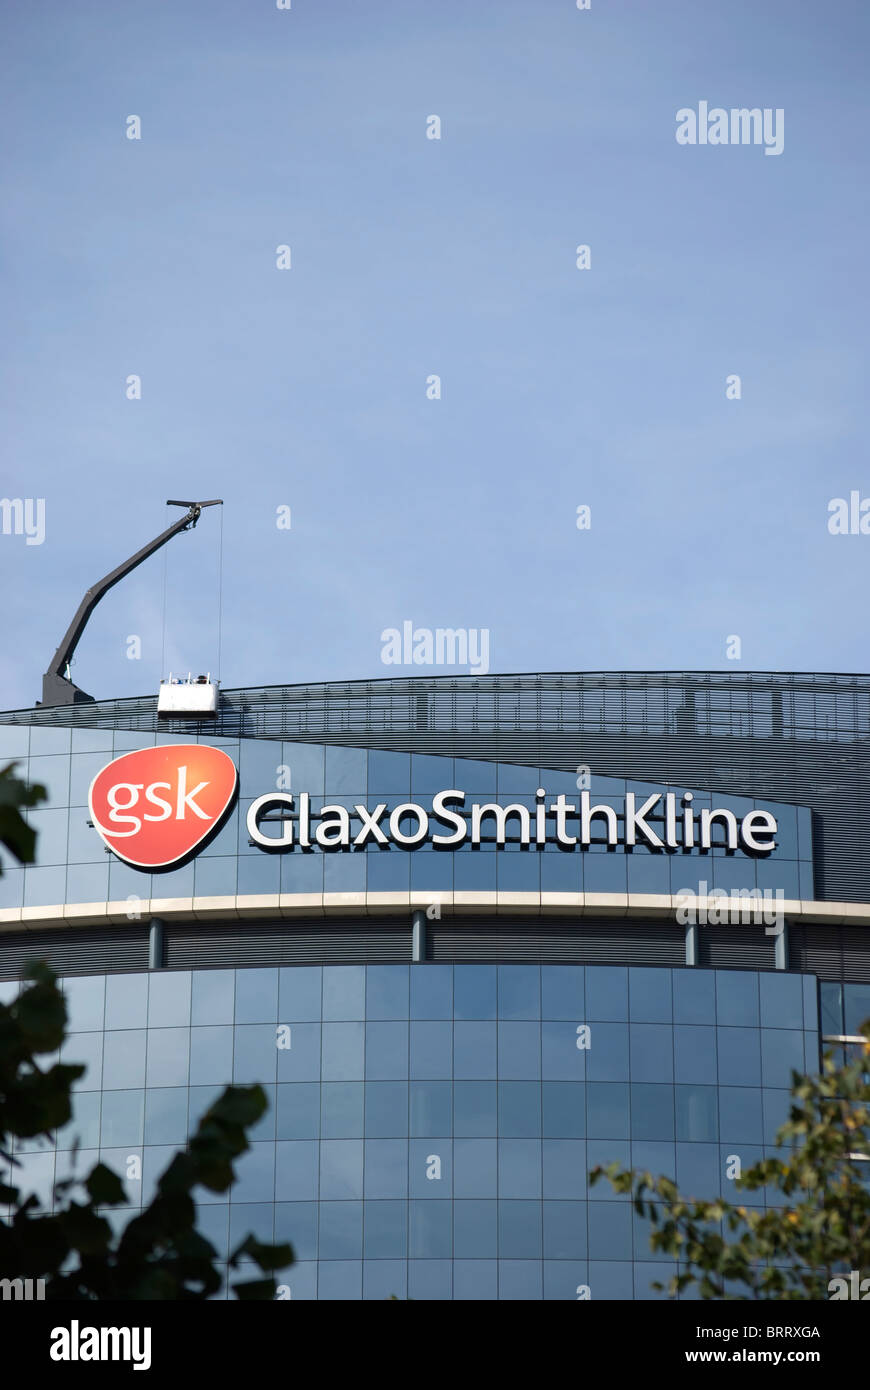 world headquarters of pharmaceutical company gsk, or glaxo smith kline, showing logo and crane for window cleaning cradle Stock Photo